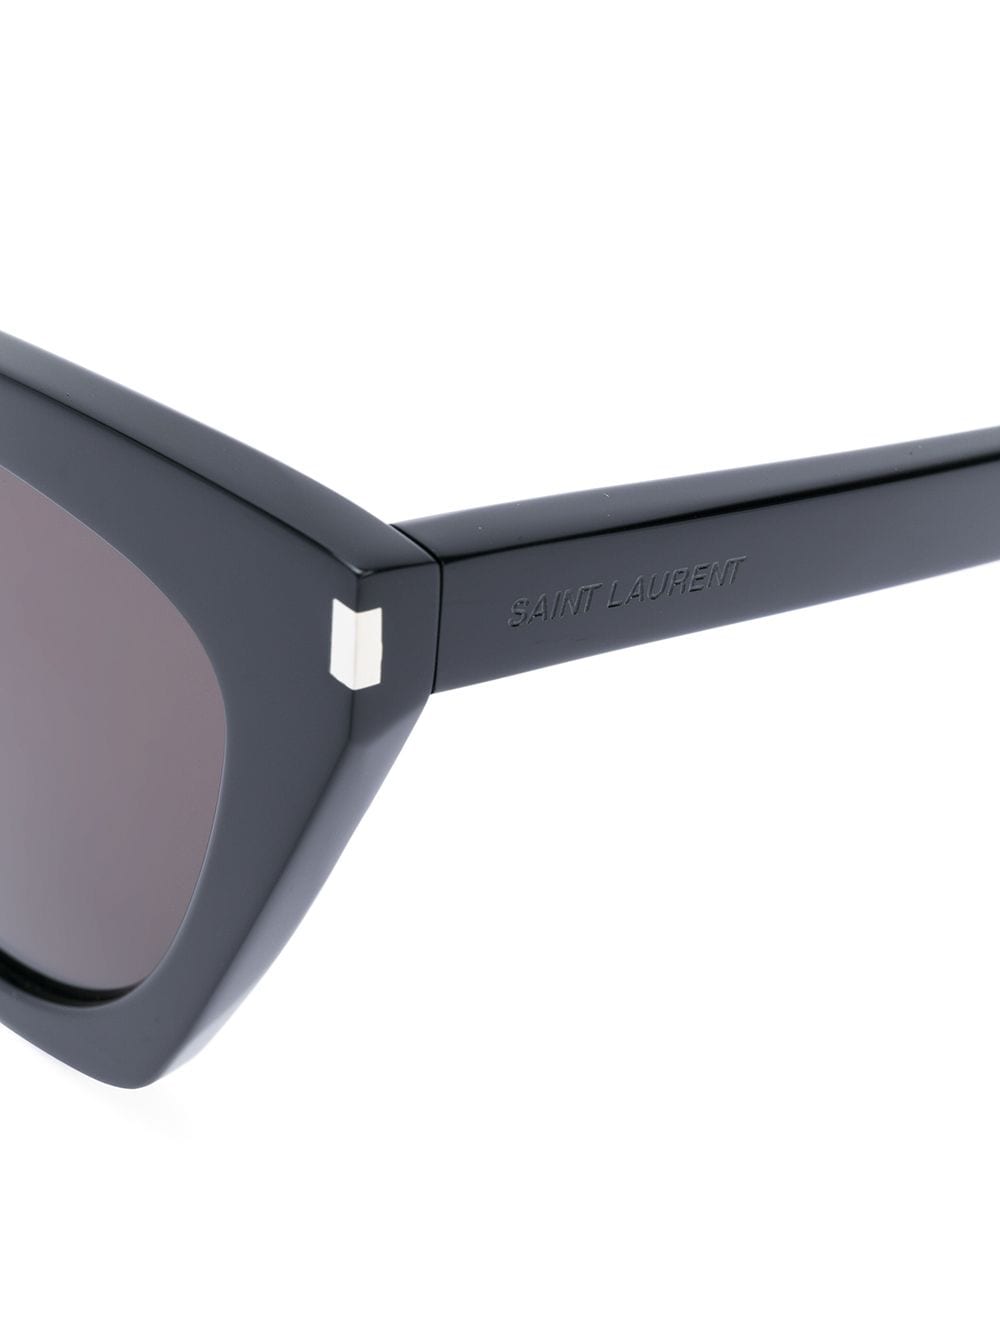 SAINT LAURENT Sleek and Chic Acetate Sunglasses in Black and Grey for Women